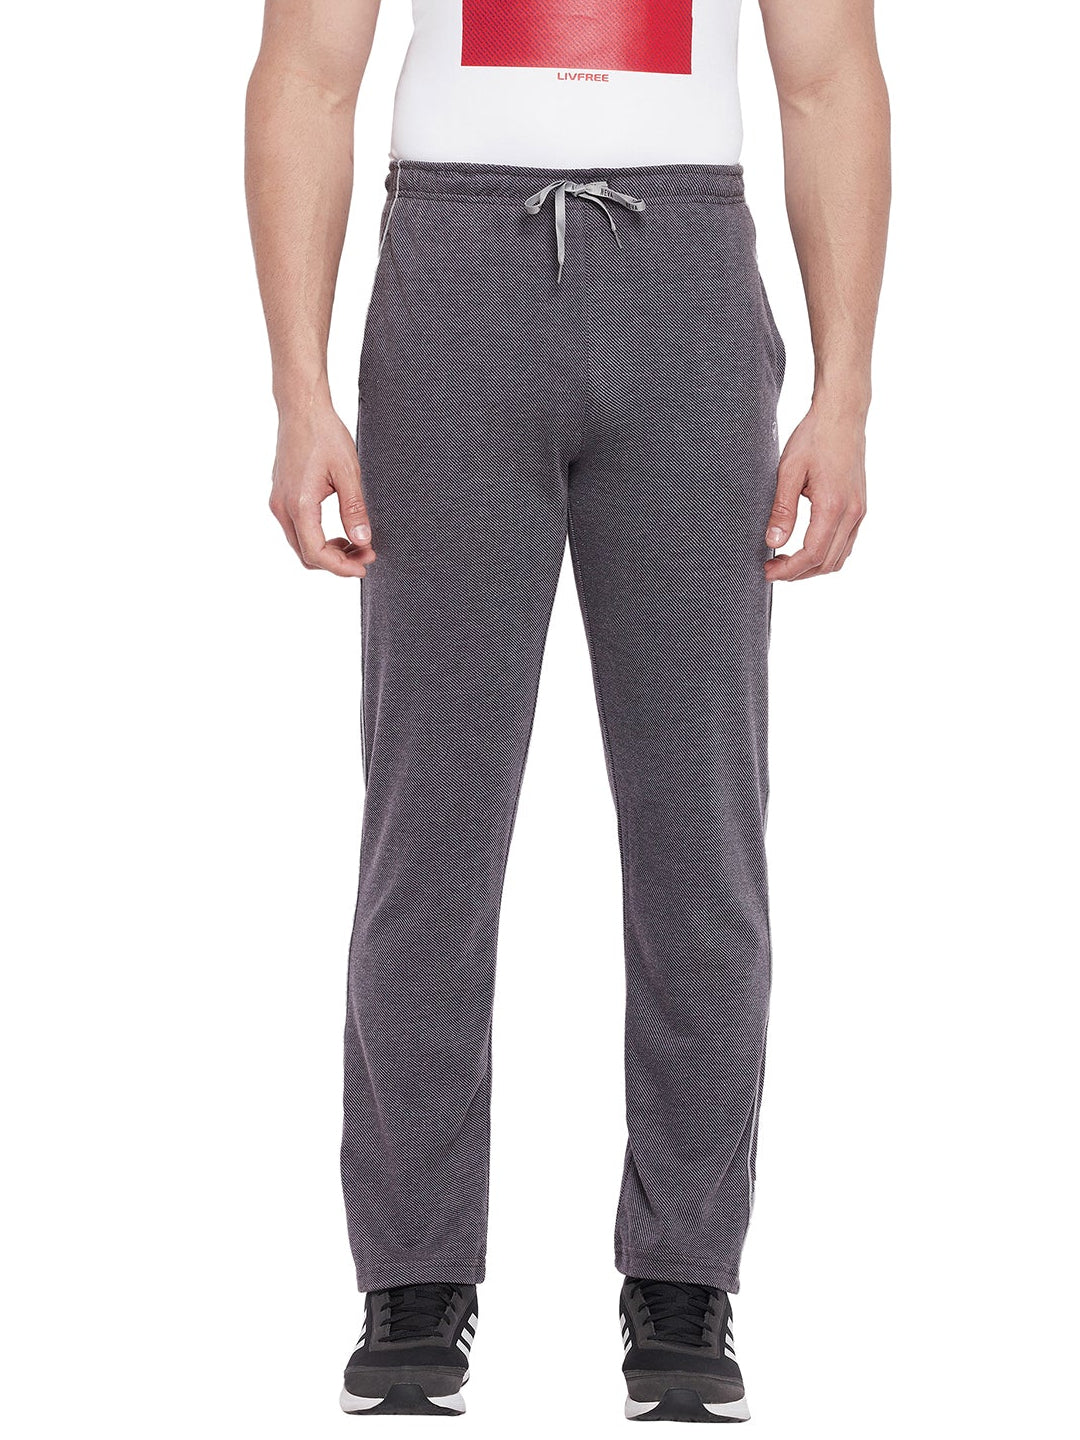 Neva Men Two Tone Cotton Rich Trackpant with Contrast side Piping- Navy